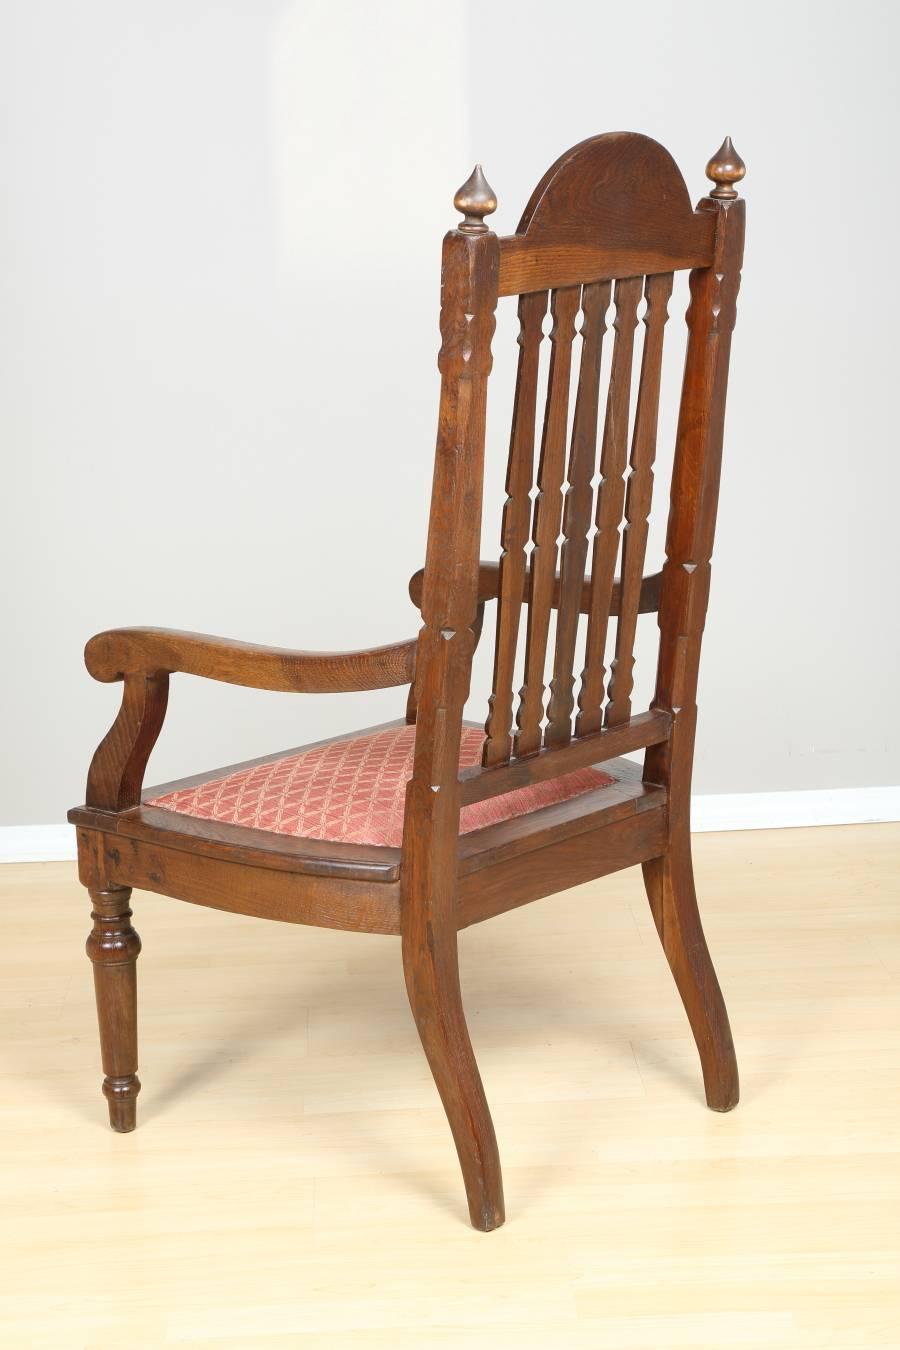 Oak armchair, circa 1850. Unique, tall, and comfortable oak armchair from Poland Biedermeier period. The chair, originally from a Polish manor, has been professionally restored, and reupholstered with new fabric. Measures: Seat height: 17.5